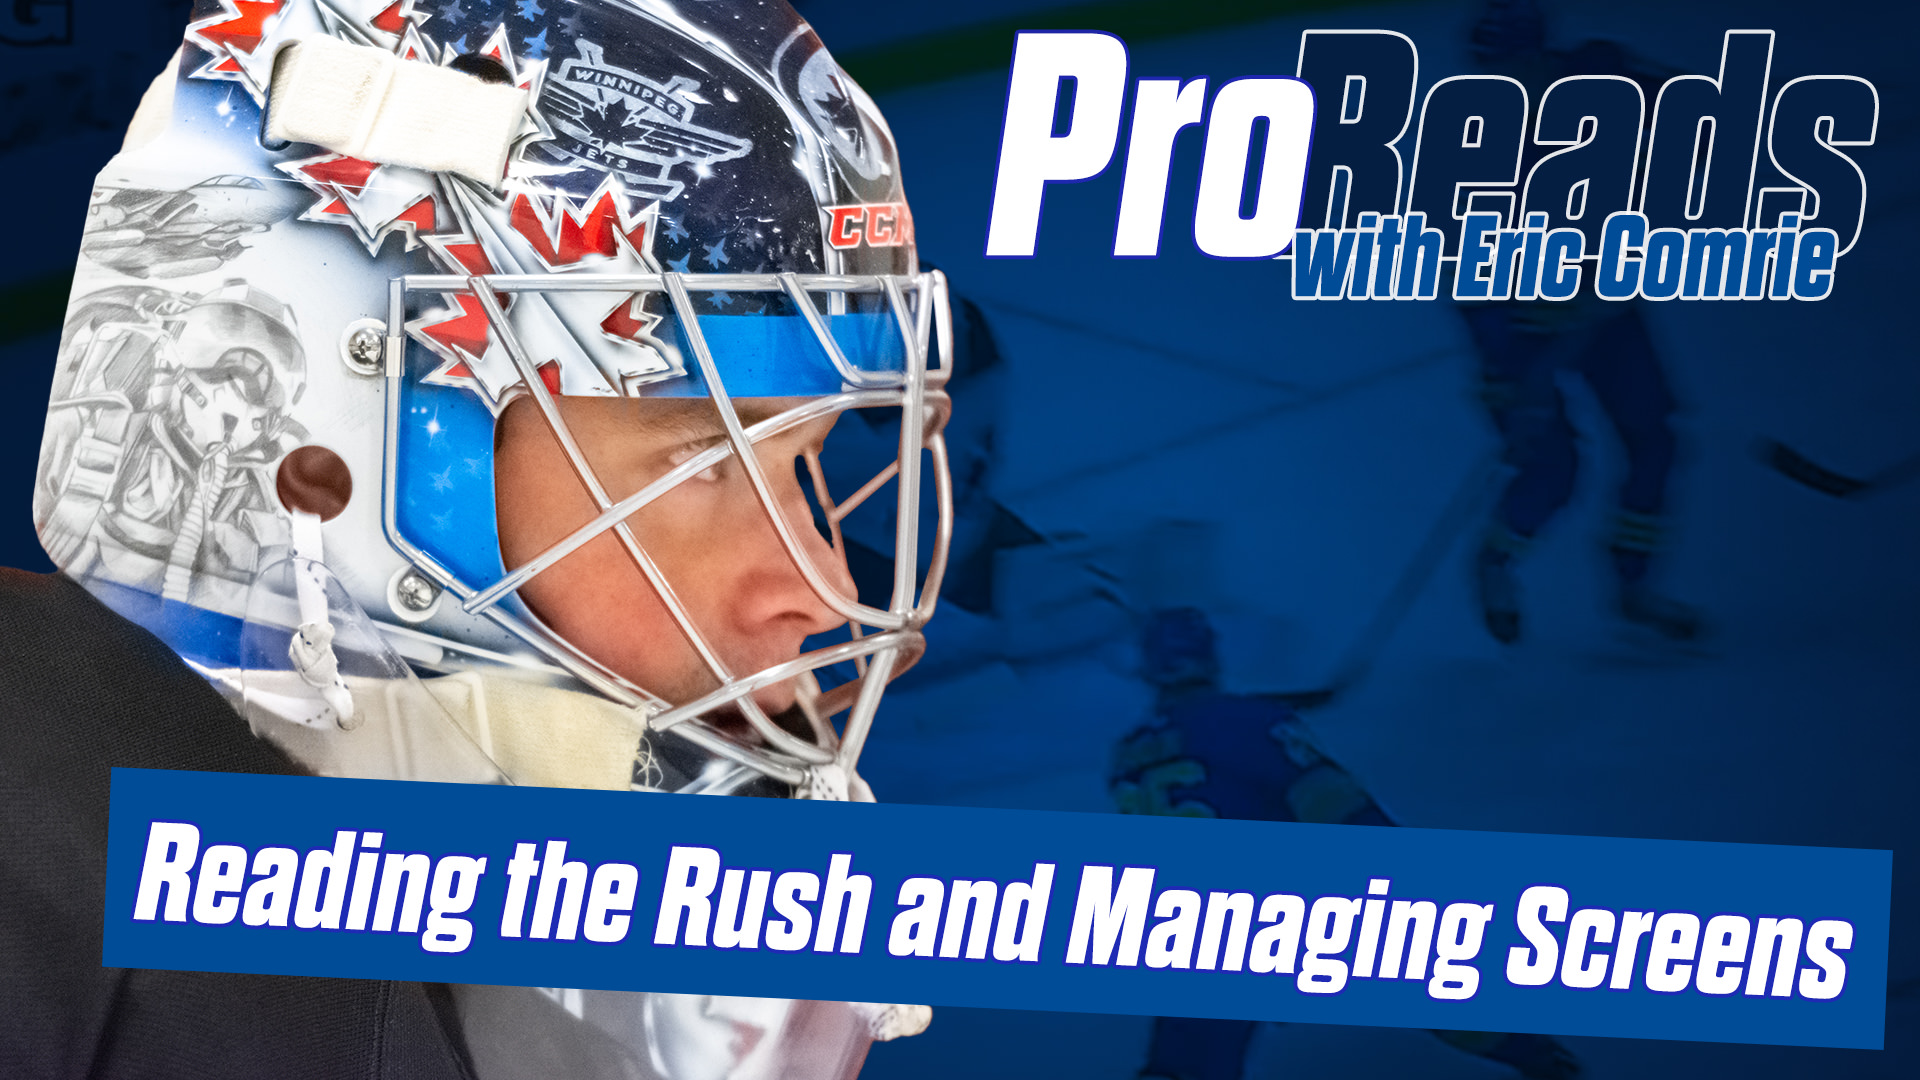 Eric Comrie Pro-ReadReading the Rush and Managing Screens